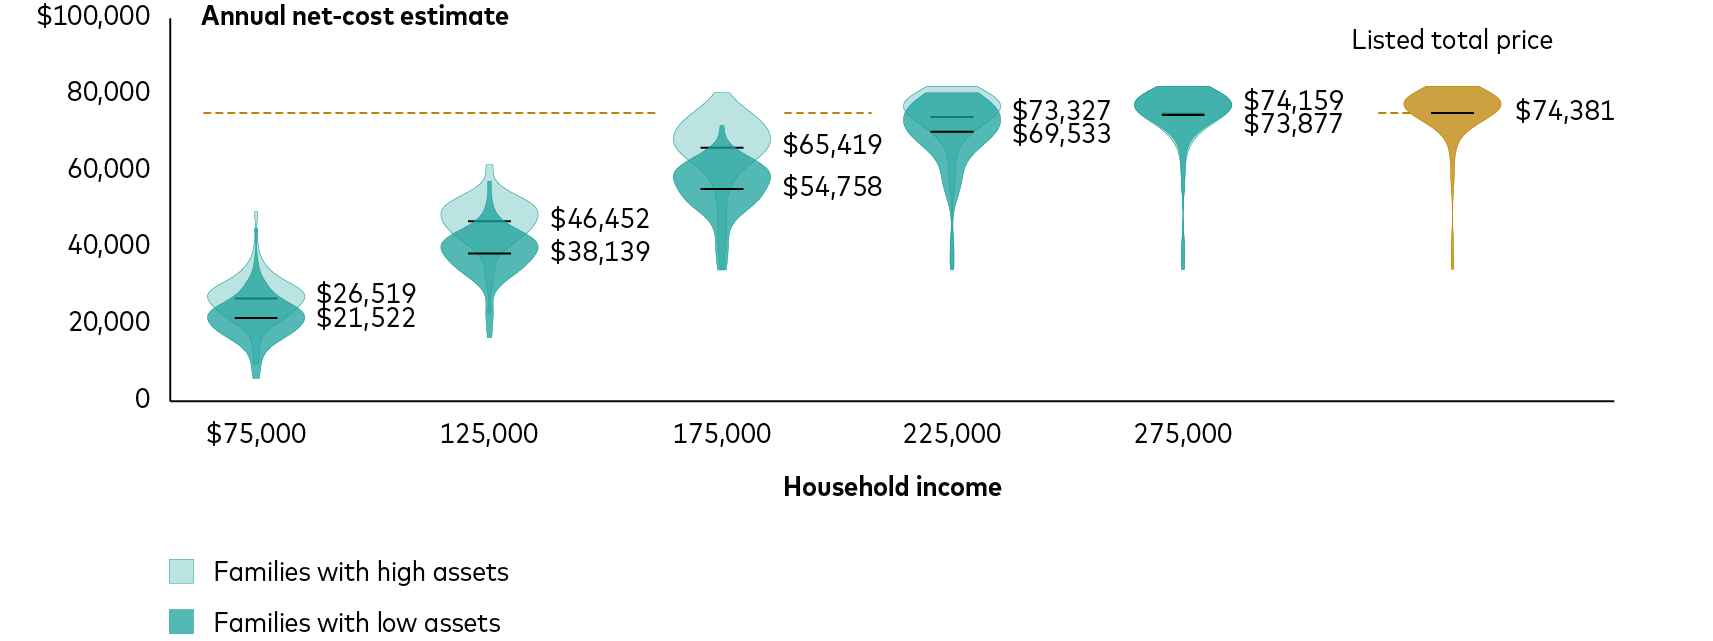 Violin chart presents annual net-cost estimates for colleges by household income and assets for familes with one student in college. The x-axis represents household income. The y-axis represents annual net cost estimate. Total price across the schools ranges from $34,100 to $81,300 with a mean of $74,381. For families with a household income of $75,000, the annual net-cost estimate range those for those with low assets was $5,900 to $44,700 with a mean of $21,522; for those with high assets, it was $9,700 to $48,900 with a mean of $26,519. For families with a household income of $125,000, the estimate range for those with low assets was $16,400 to $56,800 with a mean of $38,139; for those with high assets, it was $22,800 to $61,000 with a mean of $46,452. For families with a household income of $175,000, the estimate range for those with low assets was $33,900 to $71,100 with a mean of $54,758; for those with high assets, it was $34,100 to $79,600 with a mean of $65,419. For families with a household income of $225,000, the estimate range for those with low assets was $34,100 to $79,600 with a mean of $69,533; for those with high assets, it was $34,100 to $81,300 with a mean of $73,327. For families with a household income of $275,000, the estimate range for those with low assets was $34,100 to $81,300 with a mean of $73,877; for those with high assets, it was $34,100 to $81,300 with a mean of $74,195.